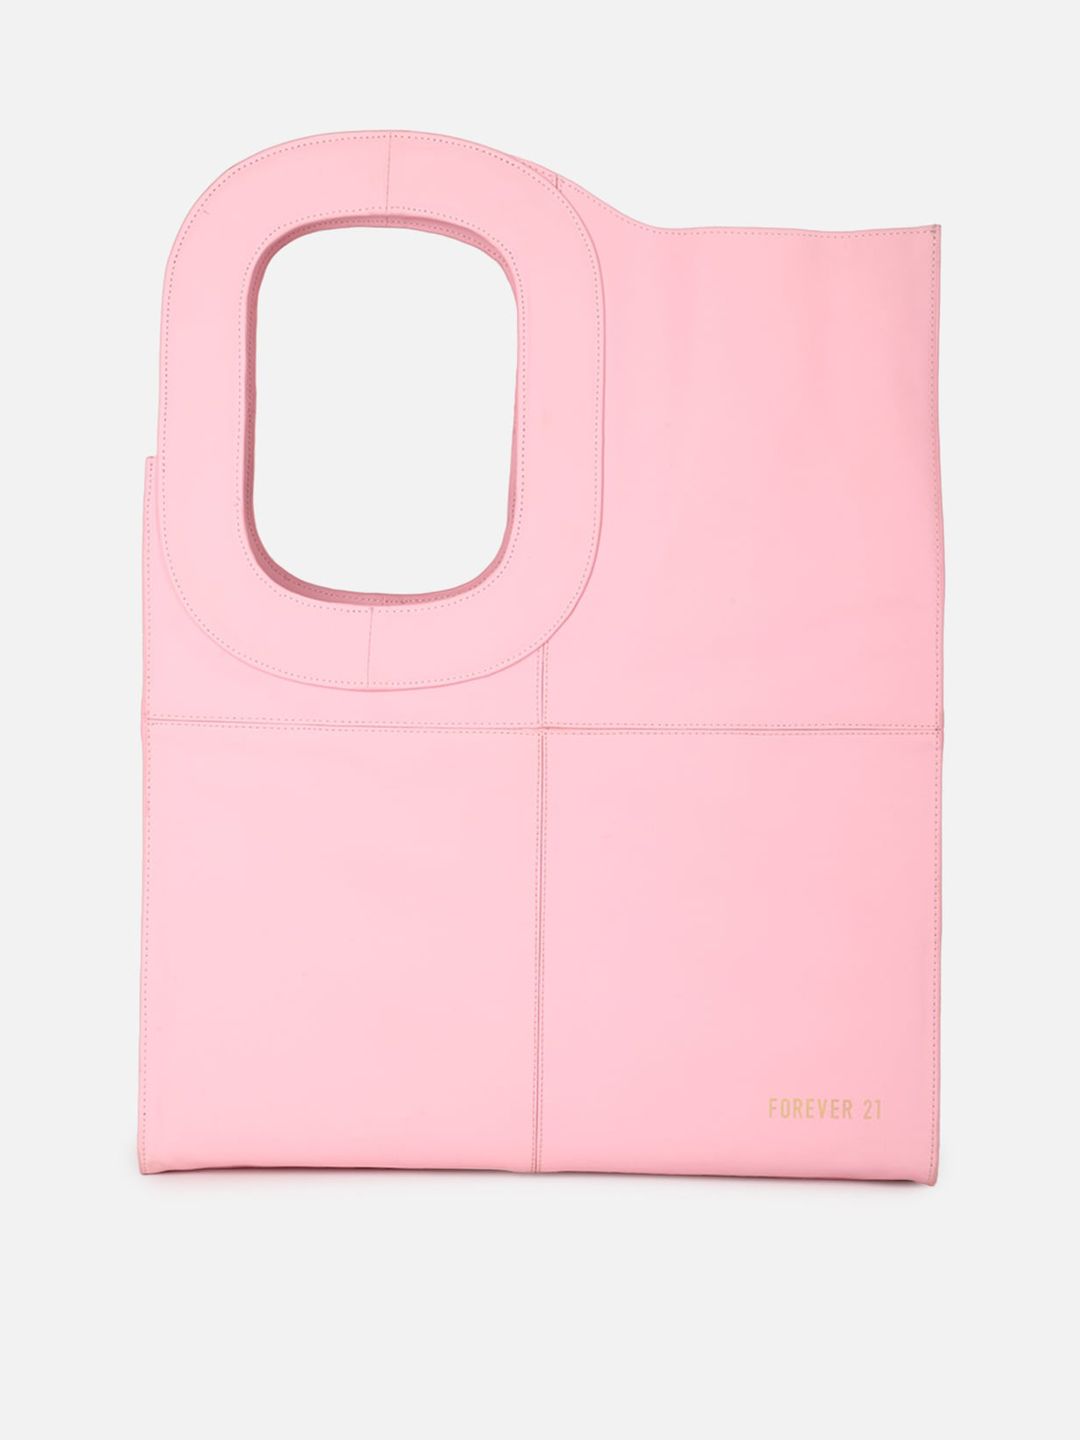 FOREVER 21 Pink PU Oversized Shopper Handheld Bag Price in India